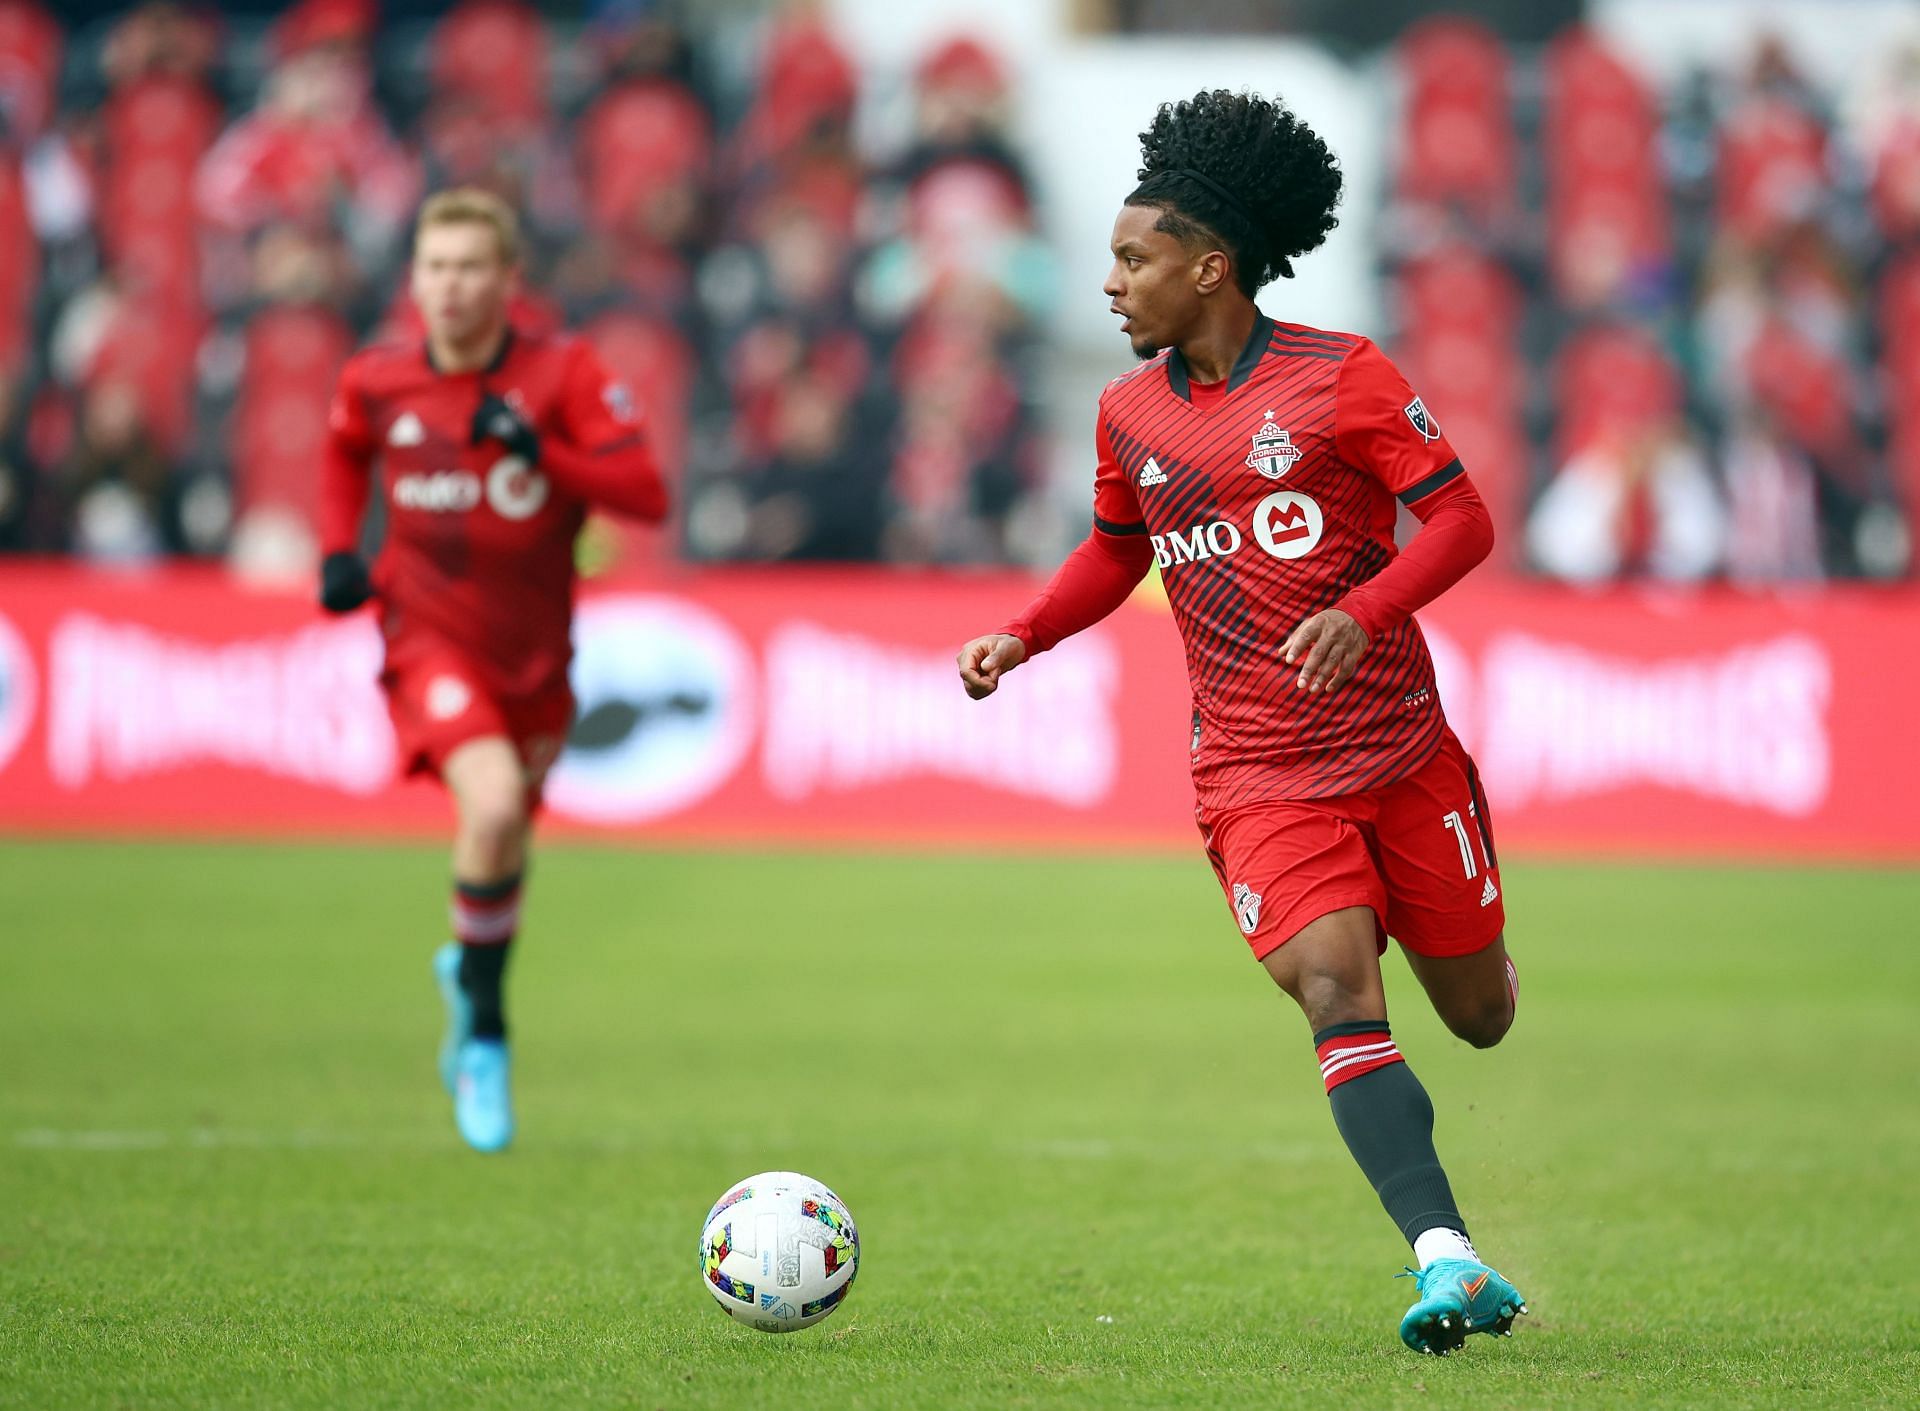 Toronto FC will clash with DC United in the MLS on Saturday.